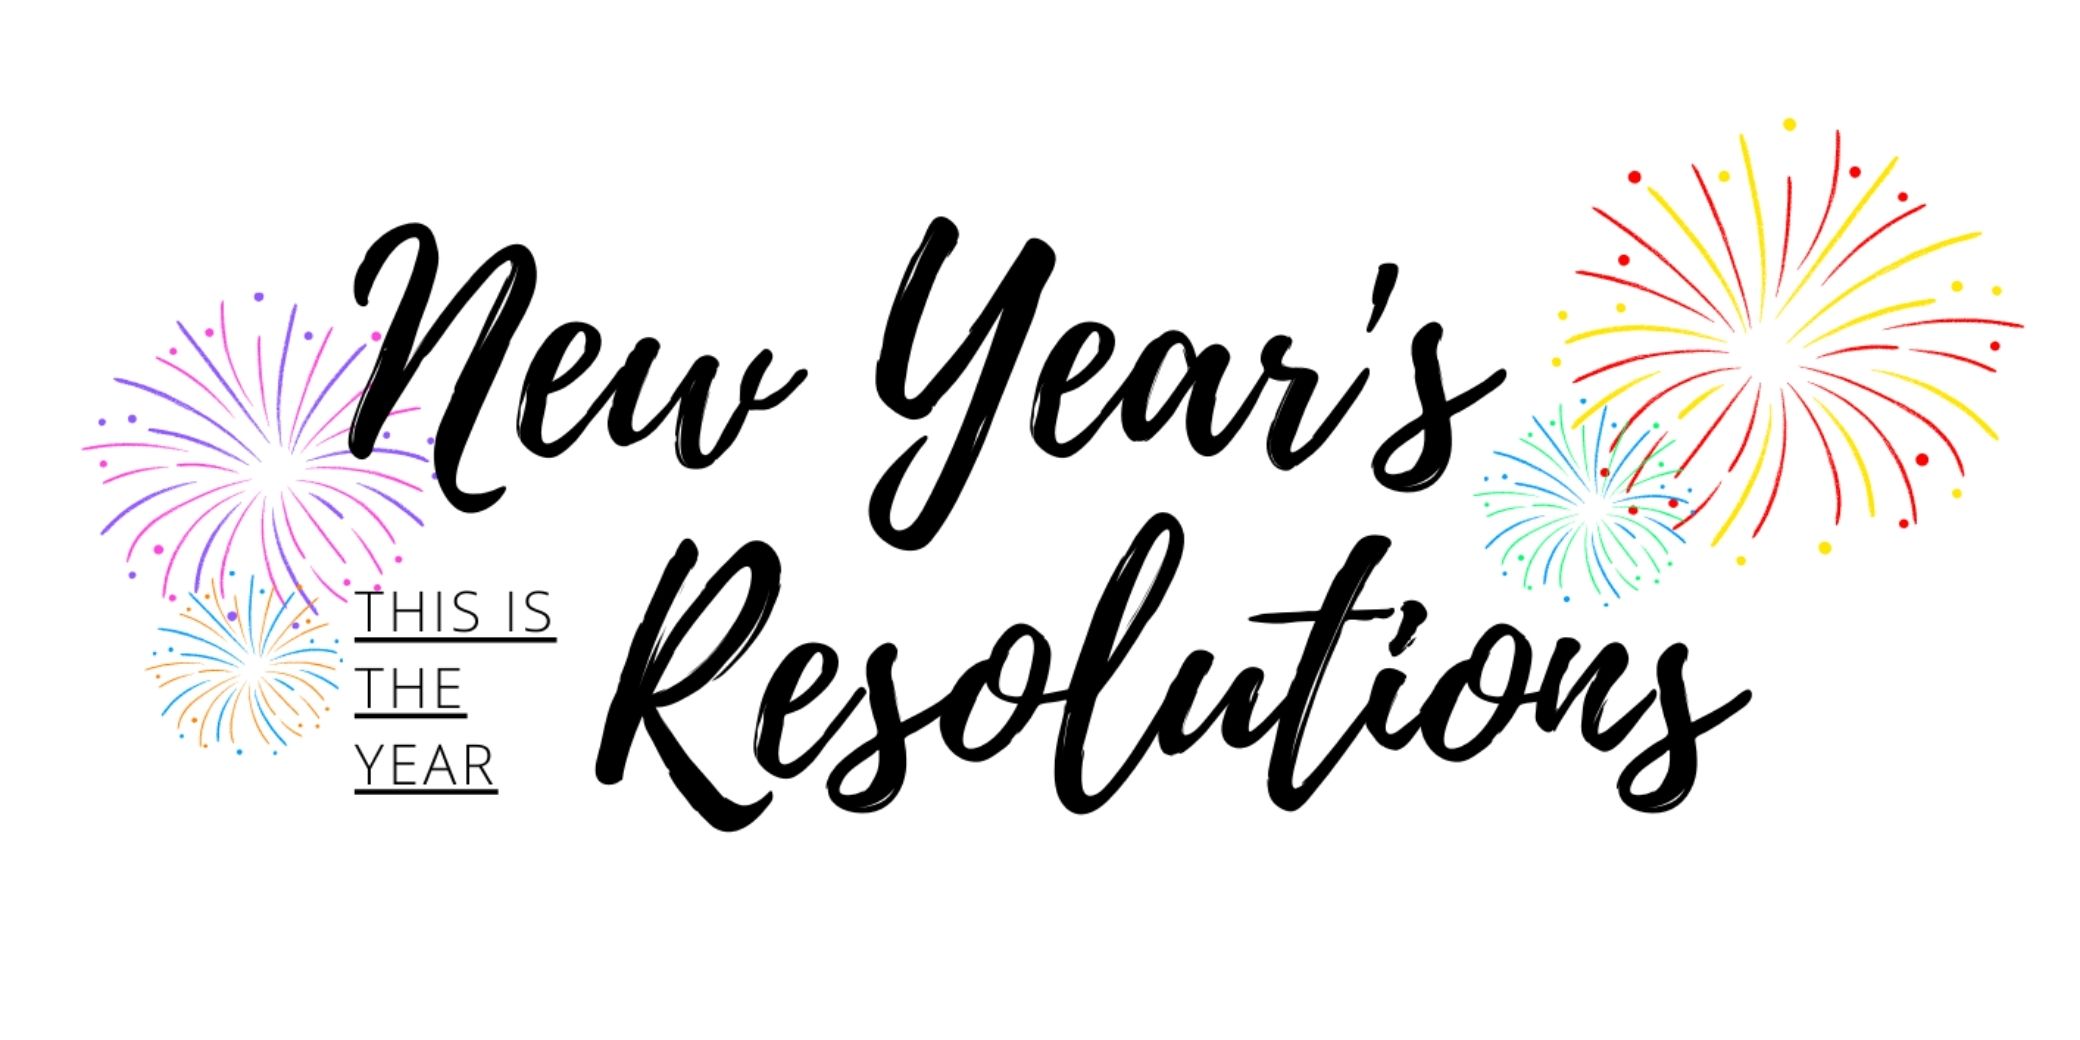 New Year's Resolution Featured Image